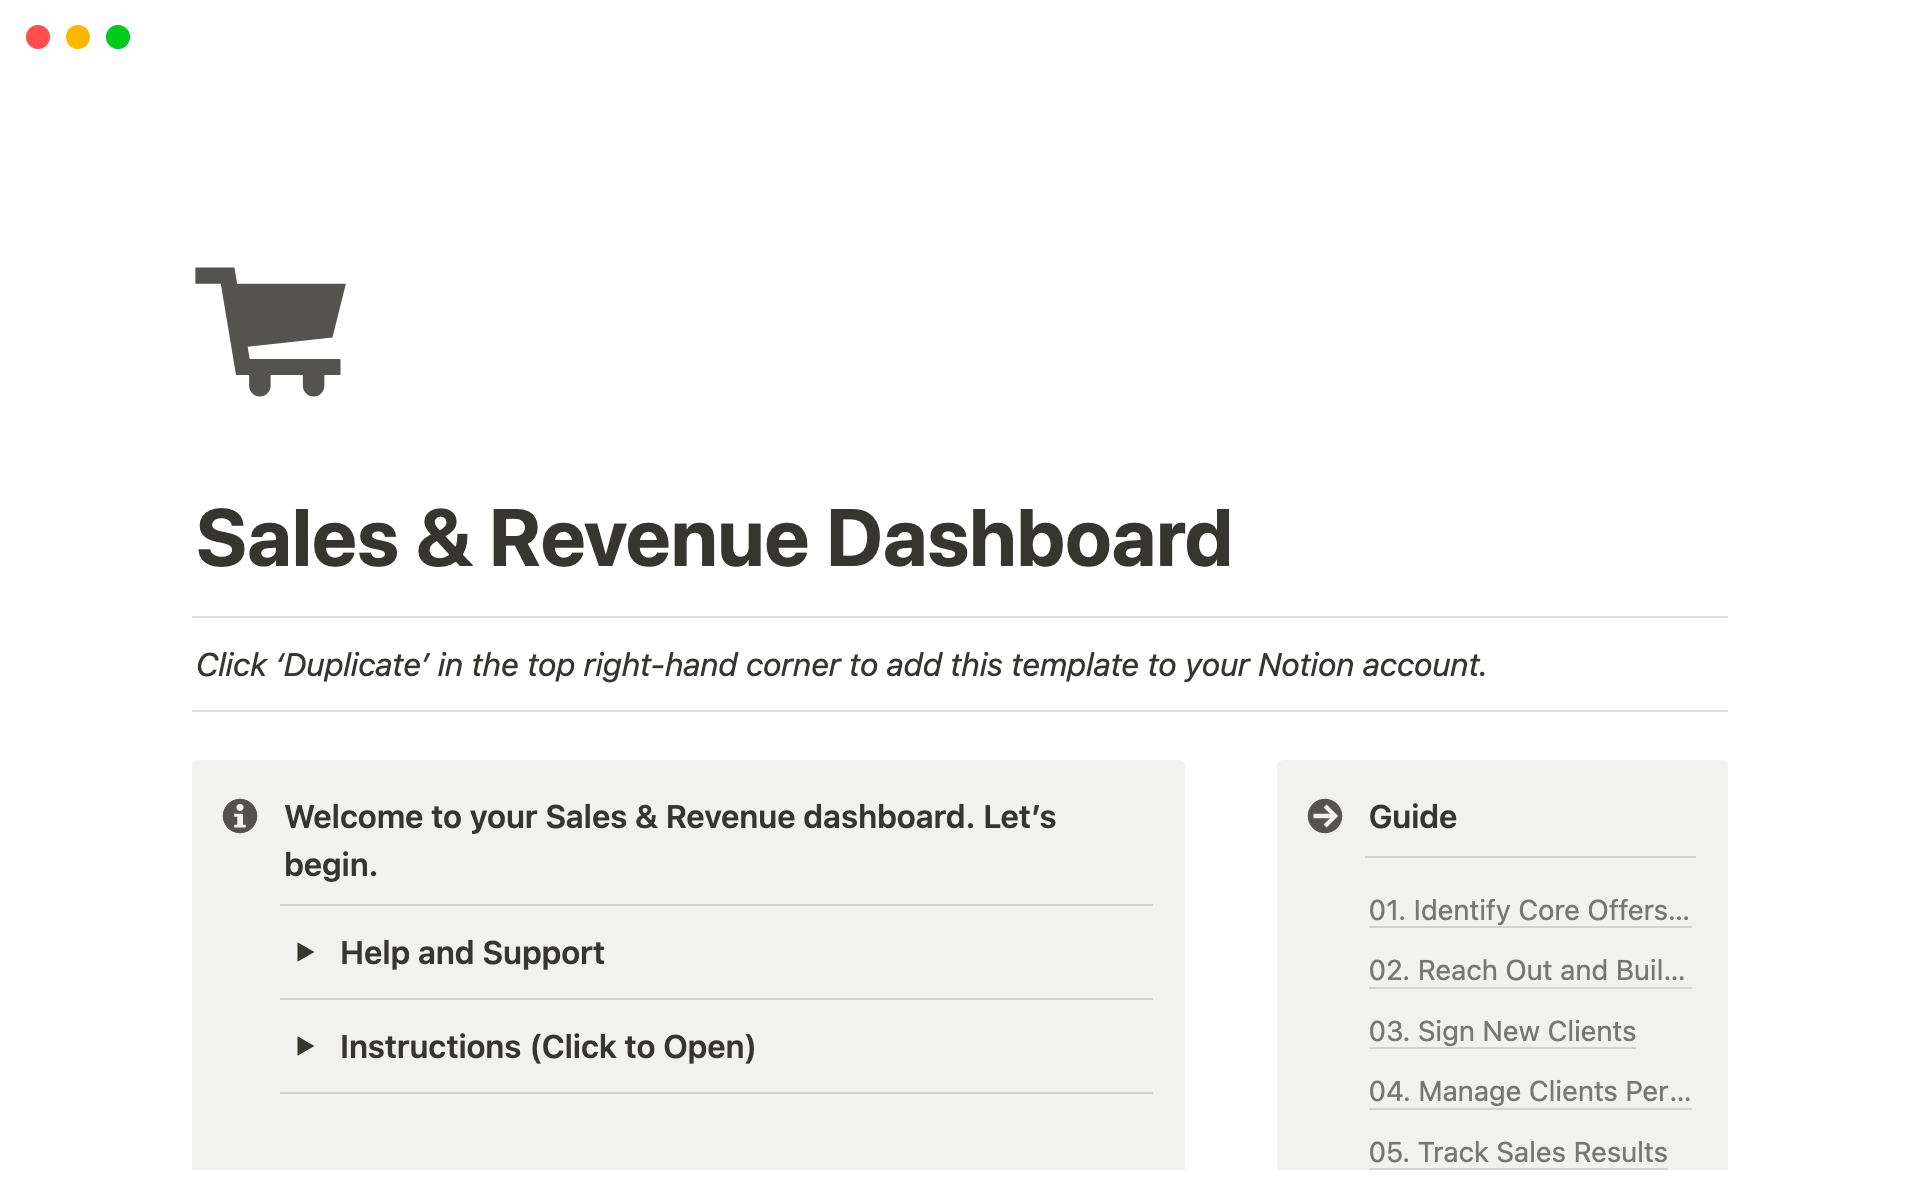 Manage all sales and revenue activities (with guidance) in a single Notion page.